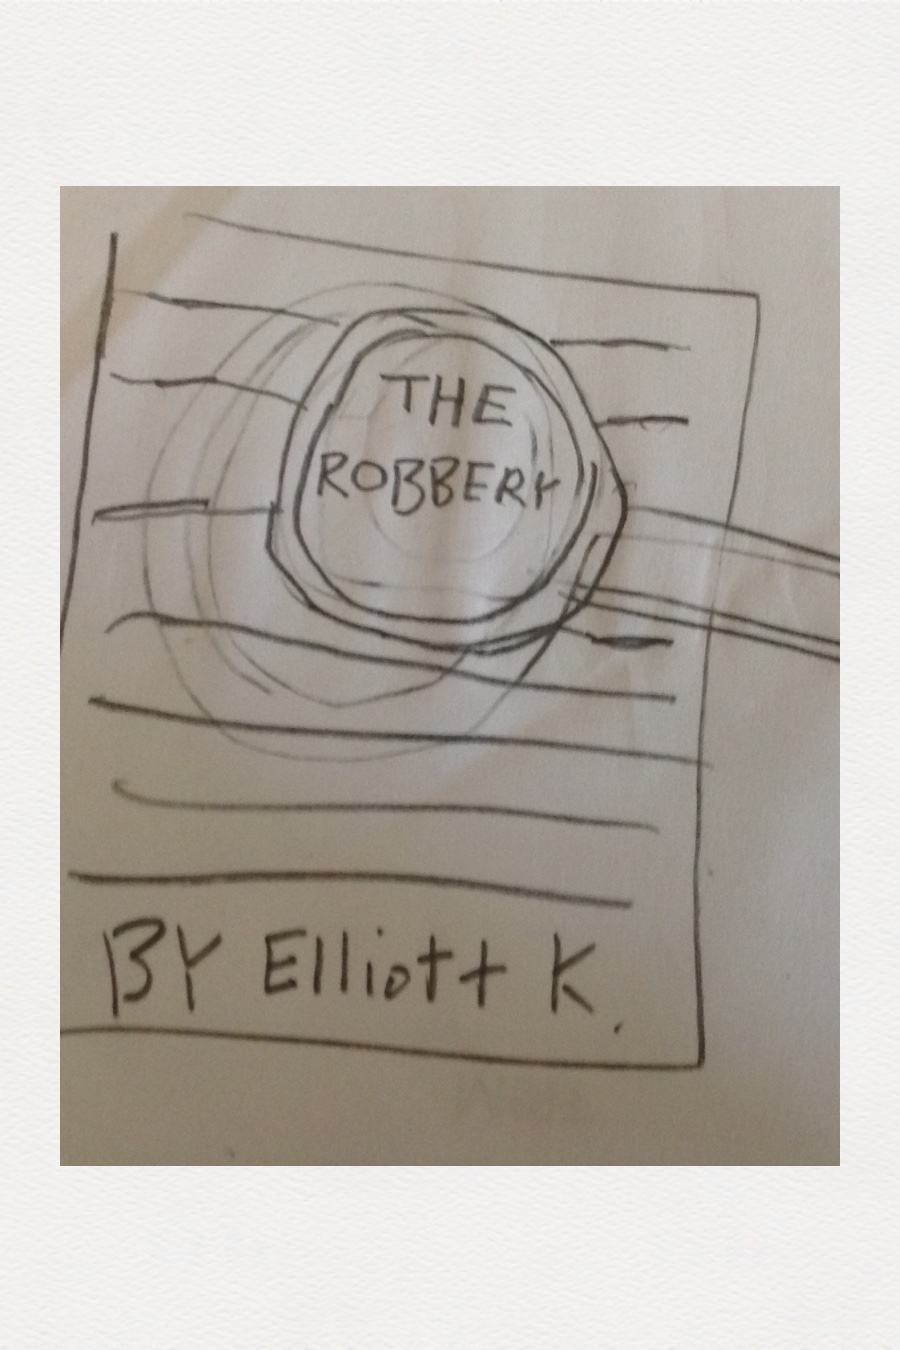 The Robbery by Elliot K